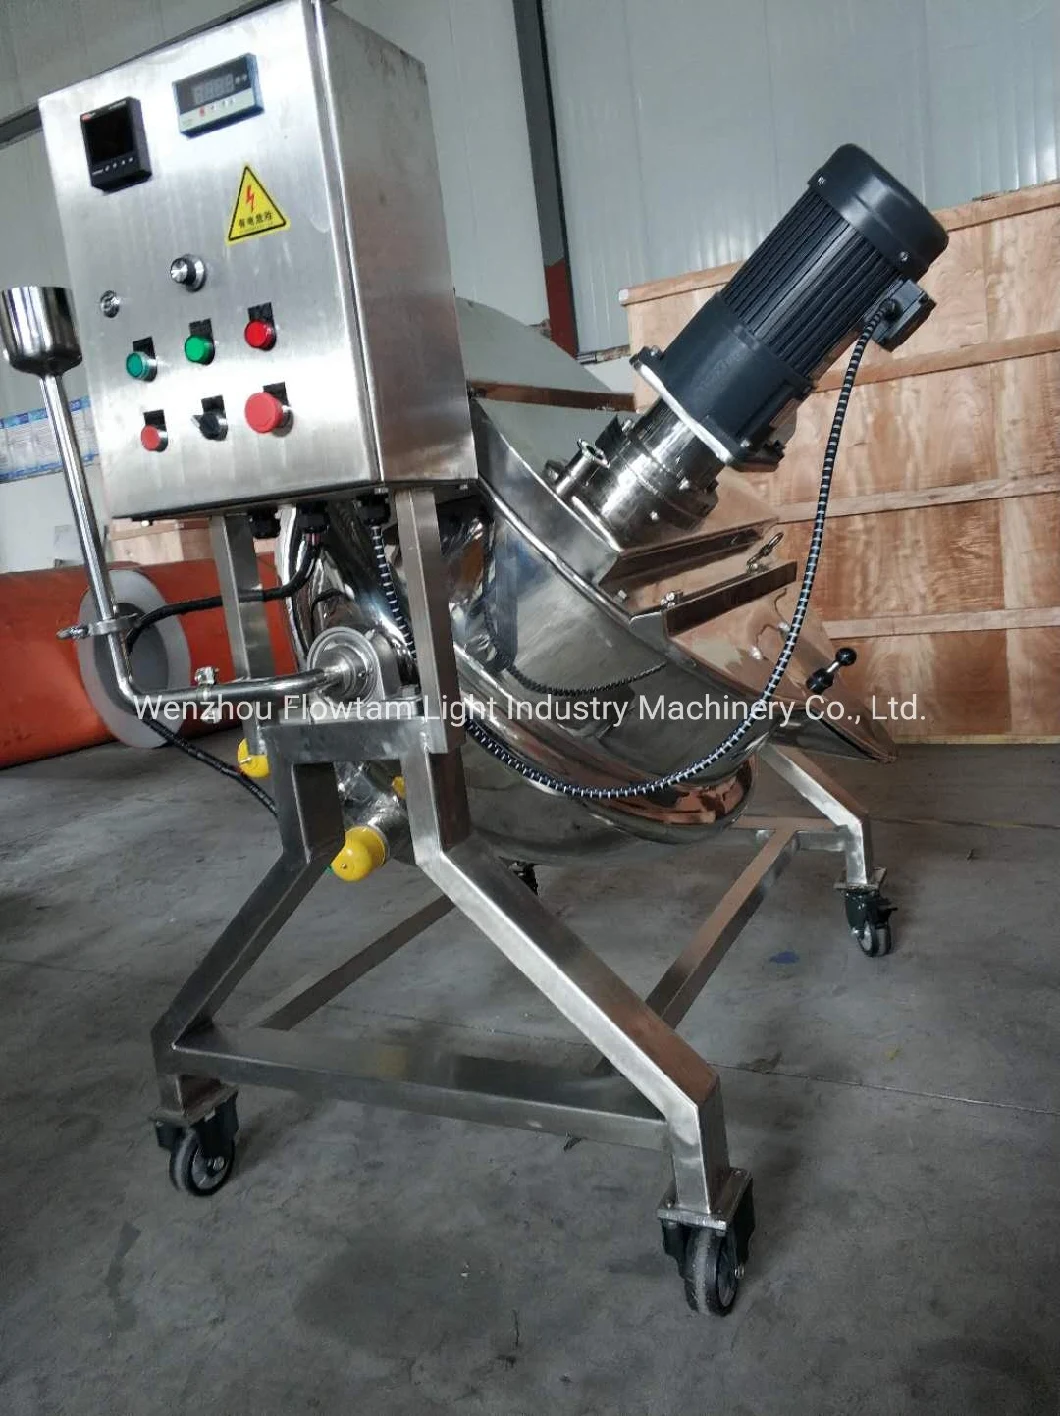 Excellent Stainless Steel Tilting-Type Industrial Jacketed Cooker with Mixer